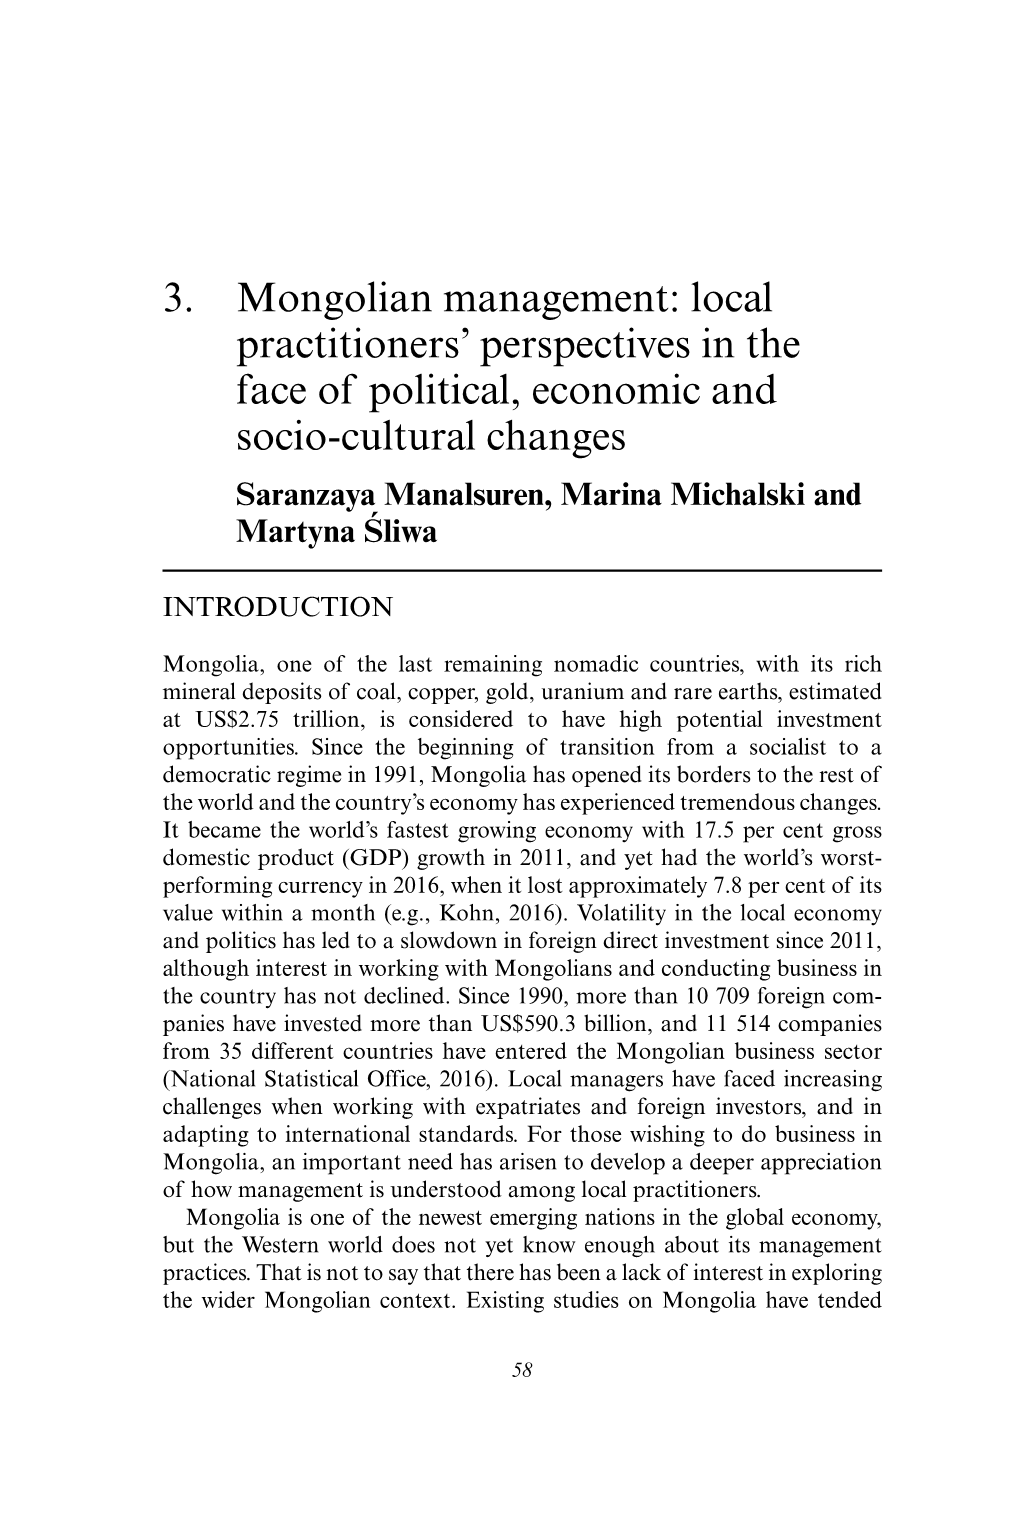 3. Mongolian Management: Local Practitioners' Perspectives in The